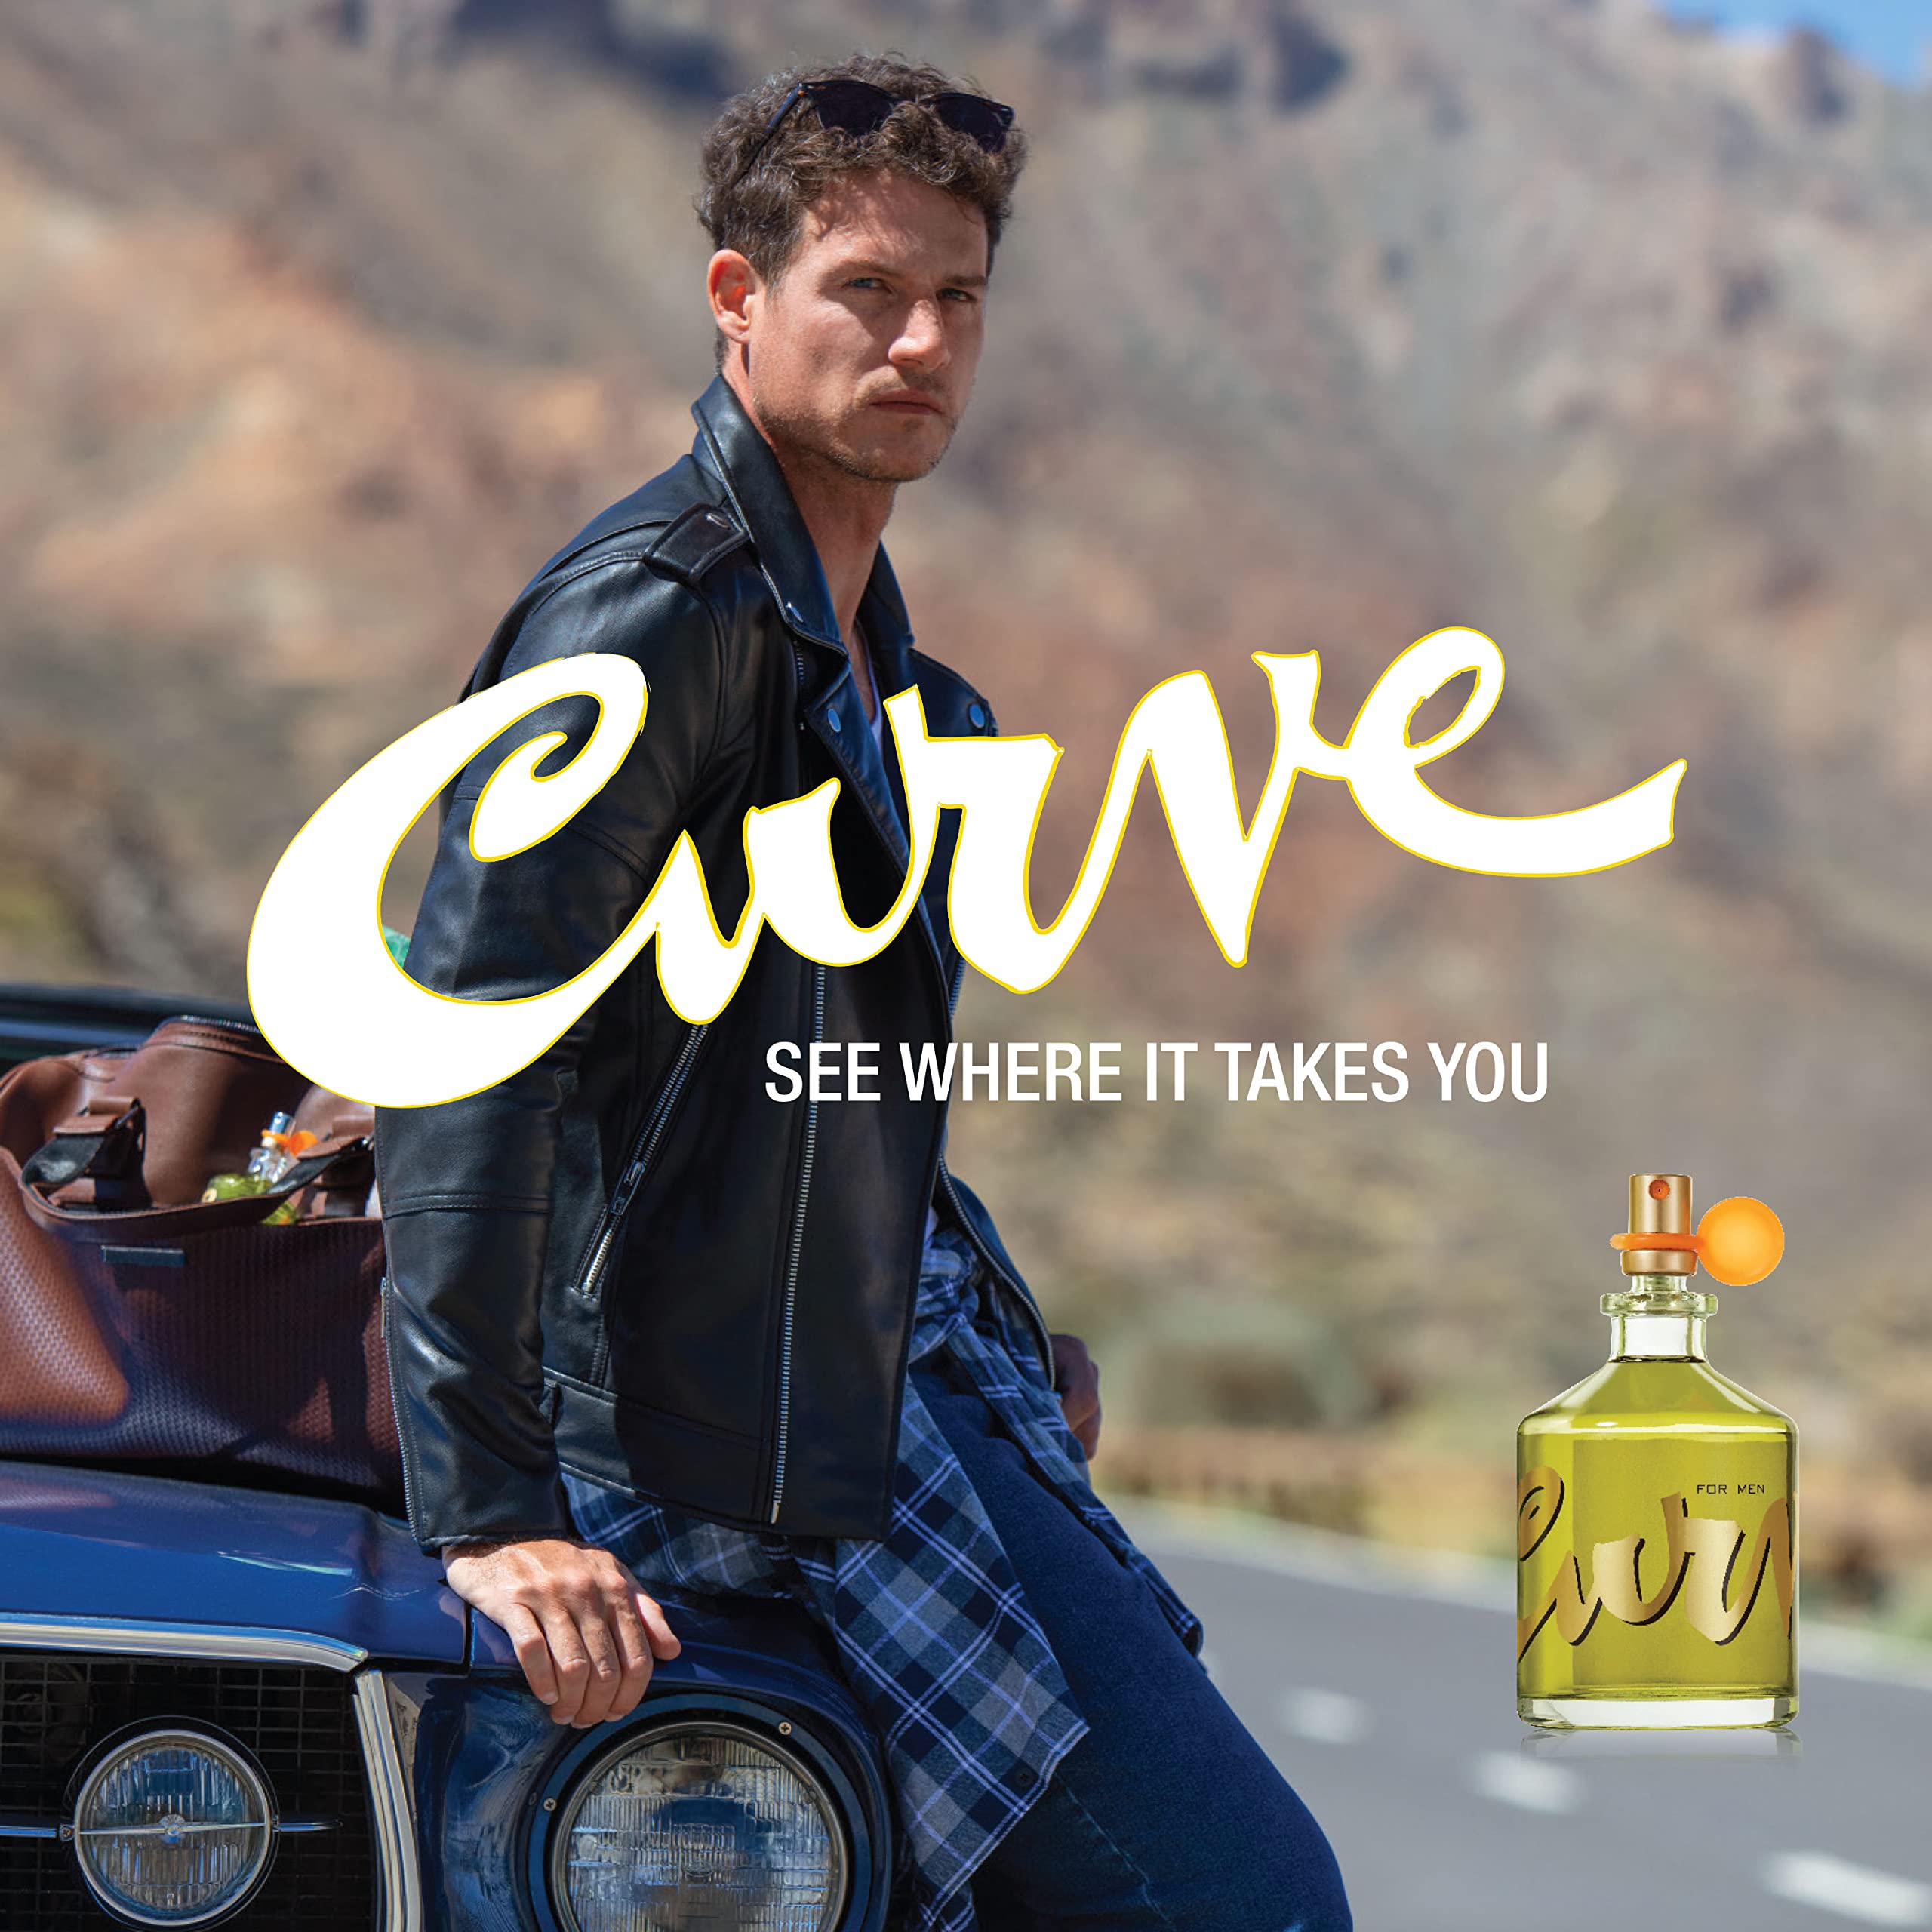 Curve Men's Cologne Fragrance Set, Deodorant, Aftershave Balm & Cologne, Spicy Wood Magnetic Scent, 3 Piece Set & Men's Cologne Fragrance Spray, Casual Day or Night Scent, Connect, 4.2 Fl Oz